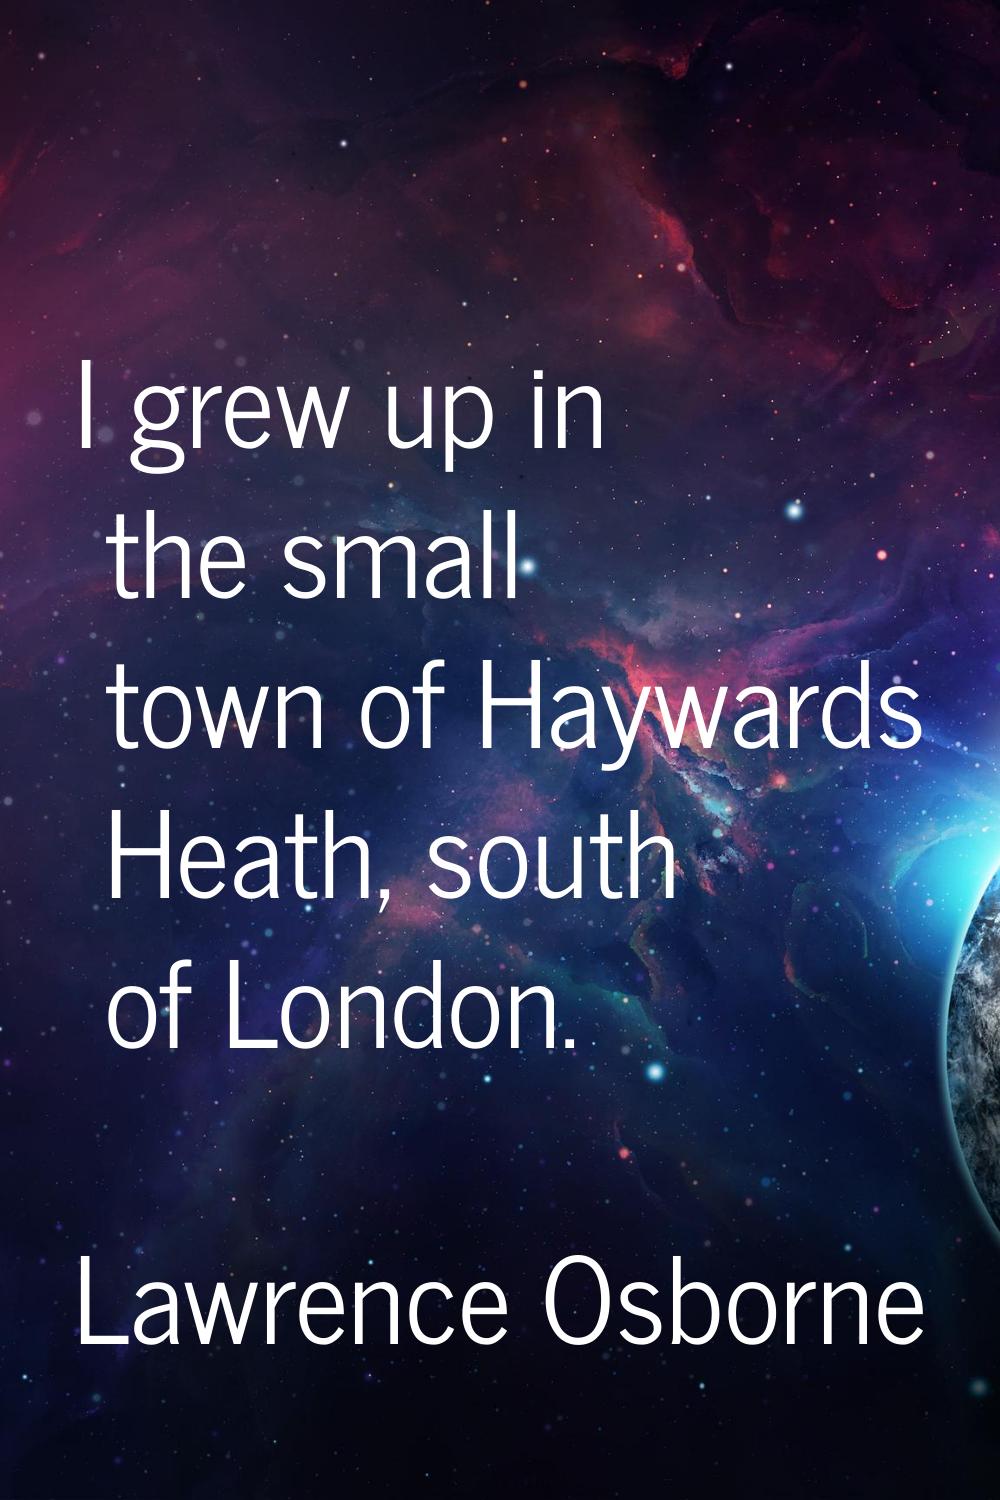 I grew up in the small town of Haywards Heath, south of London.